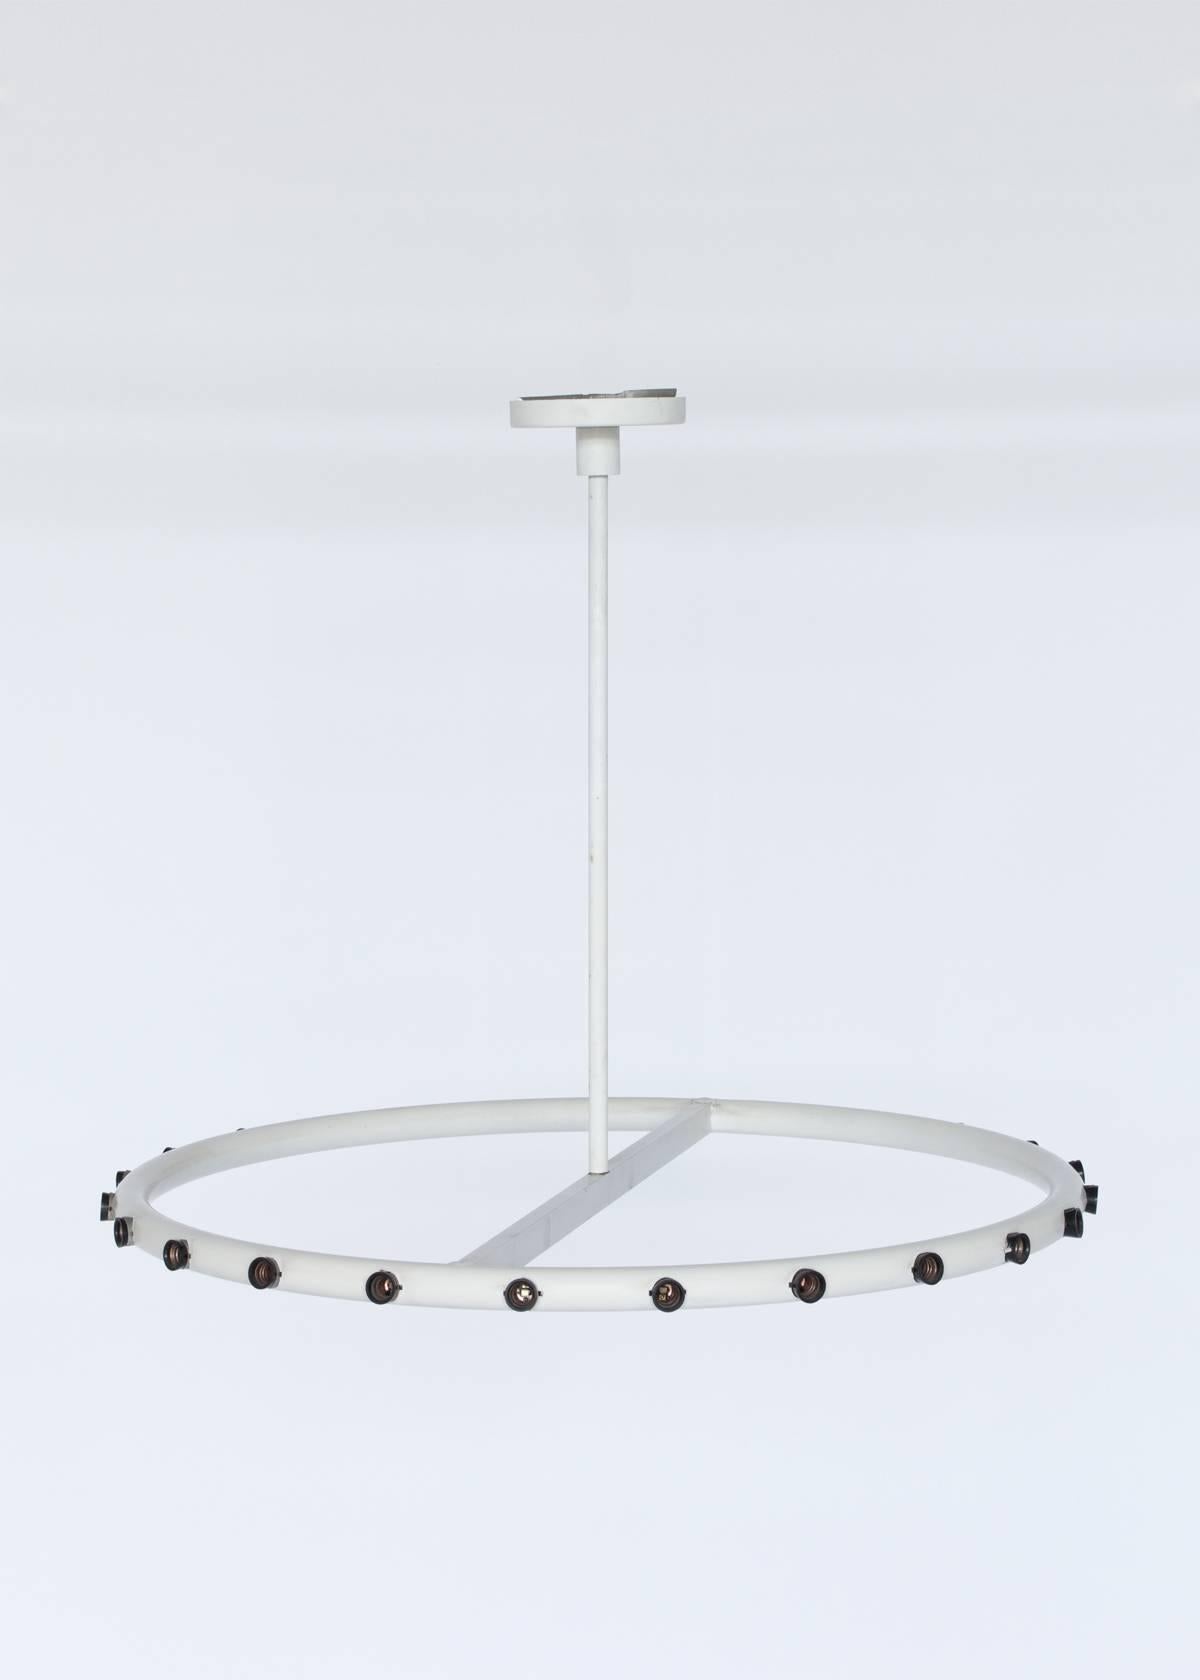 20th Century Twenty-Four-Bulb Hoop Ceiling Lamp/Chandelier by Alvin Lustig. This is the smaller of the two lamps, we also have an Extra Large vesion of this light.

Minimal and elegant twenty-four-bulb ceiling light by Alvin Lustig. This iconic